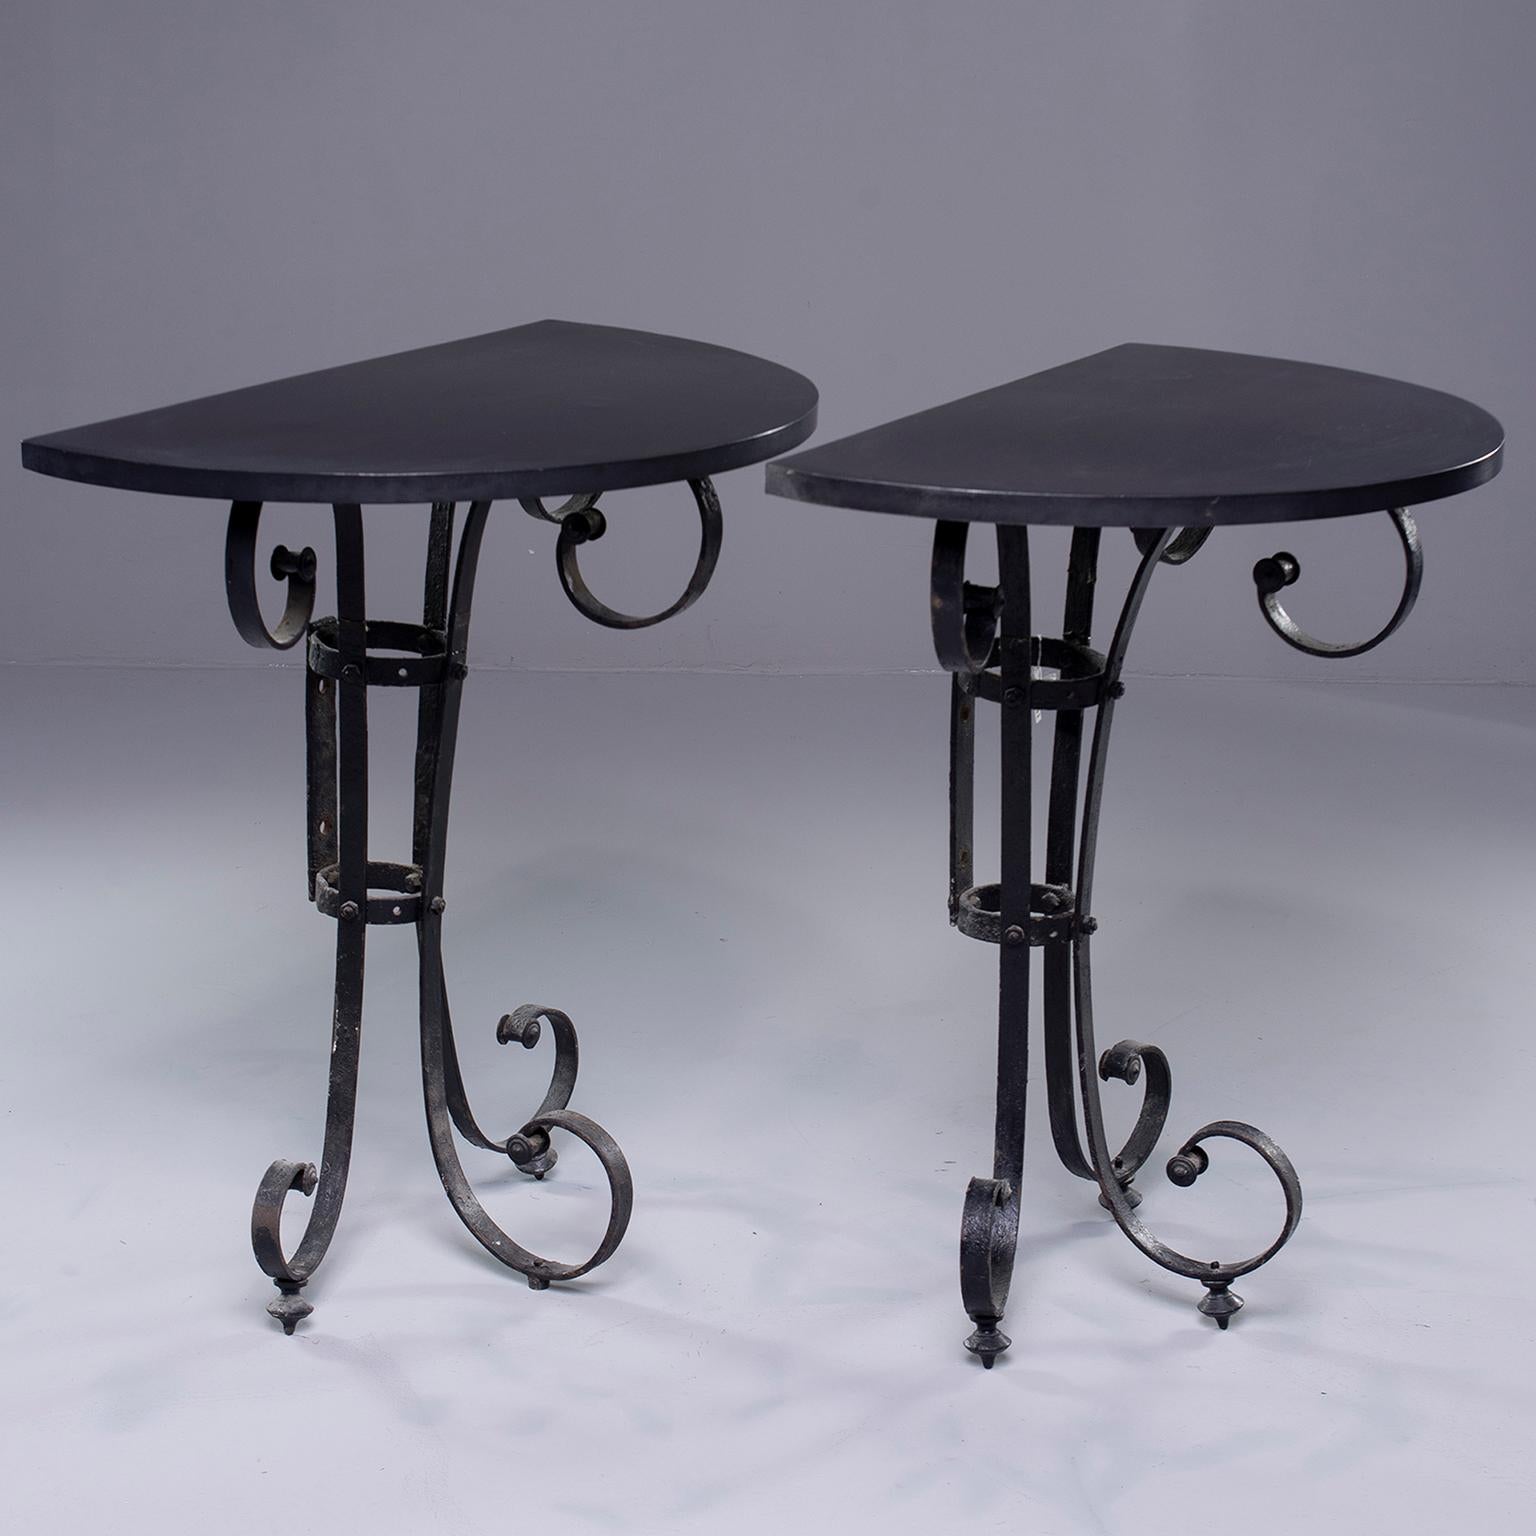 Pair of small Italian demilune shaped console tables made with iron base of late 19th century Italian candelabra and topped with new, custom made matte black metal tops. Sold and priced as a pair.